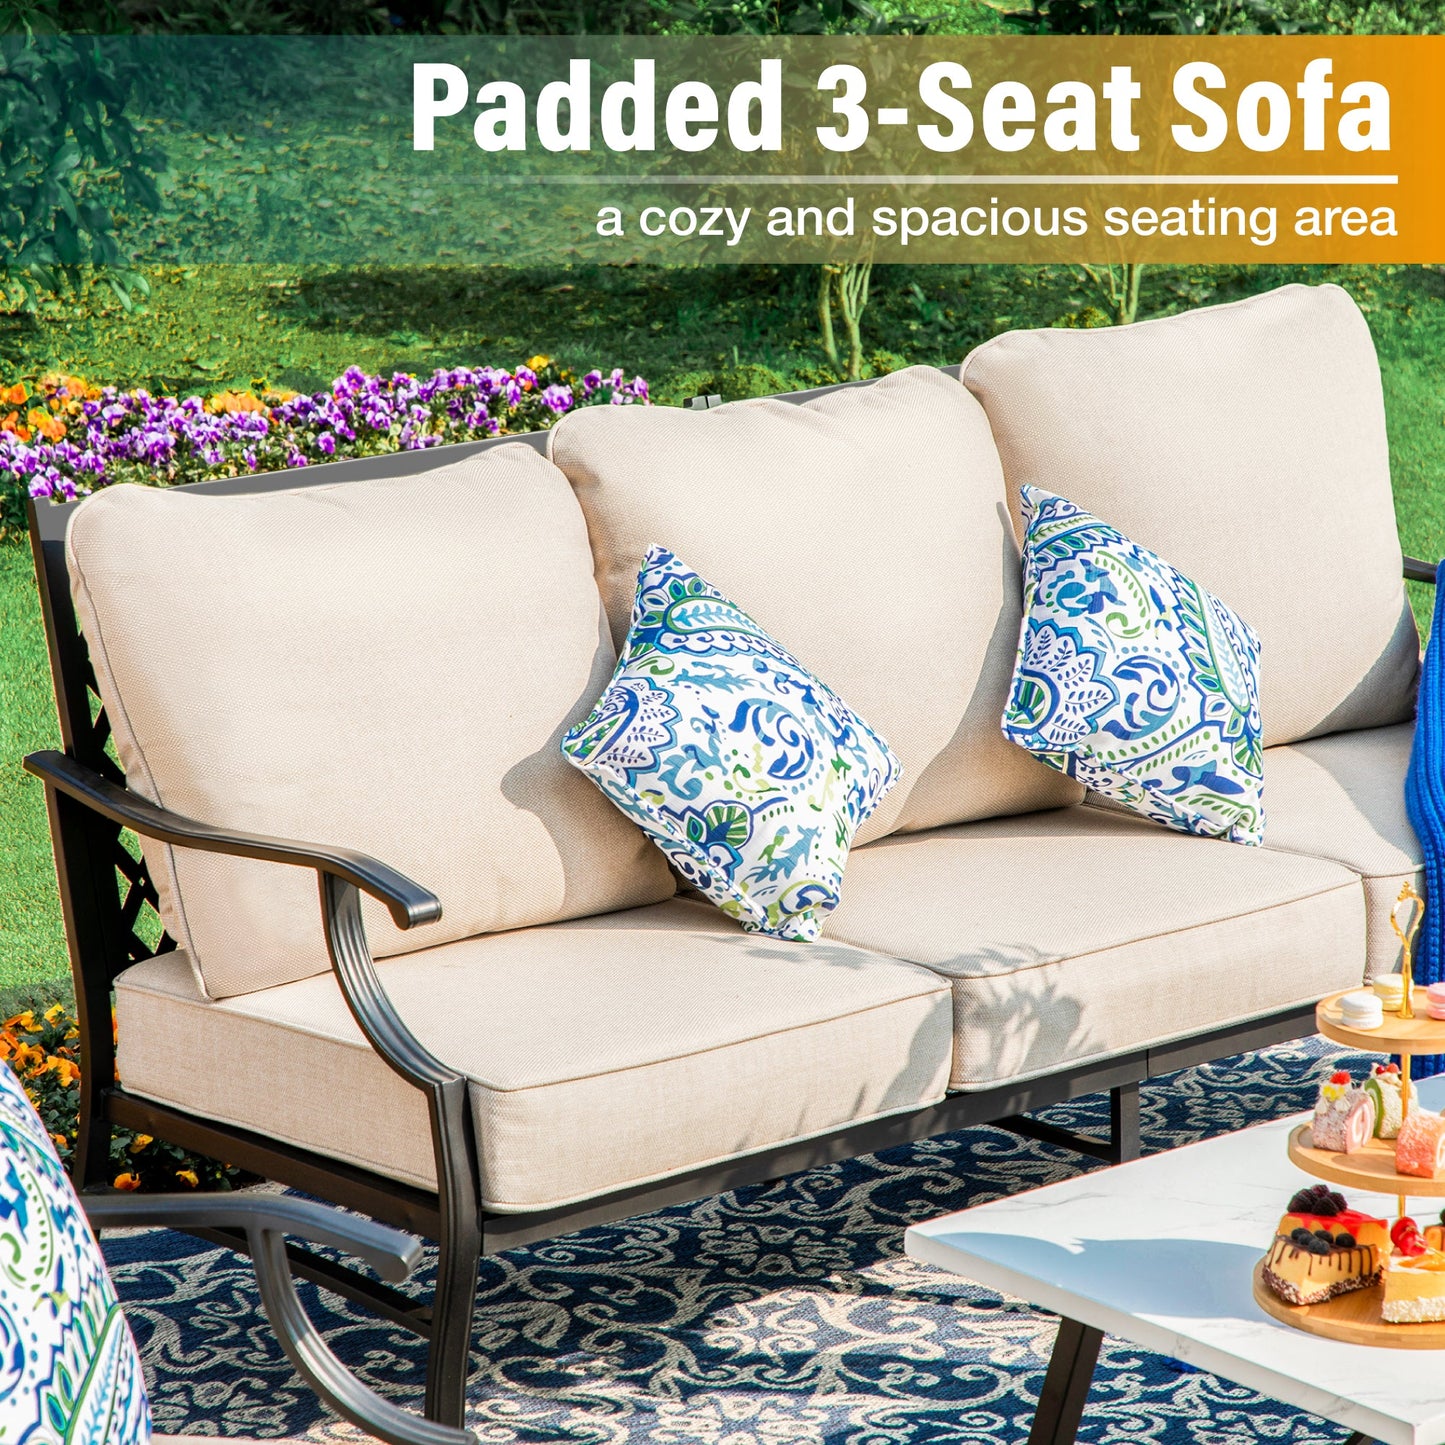 Sophia&William 5 Seat Patio Conversation Set Outdoor Sofa Chairs and Marble Table Furniture Set, Beige